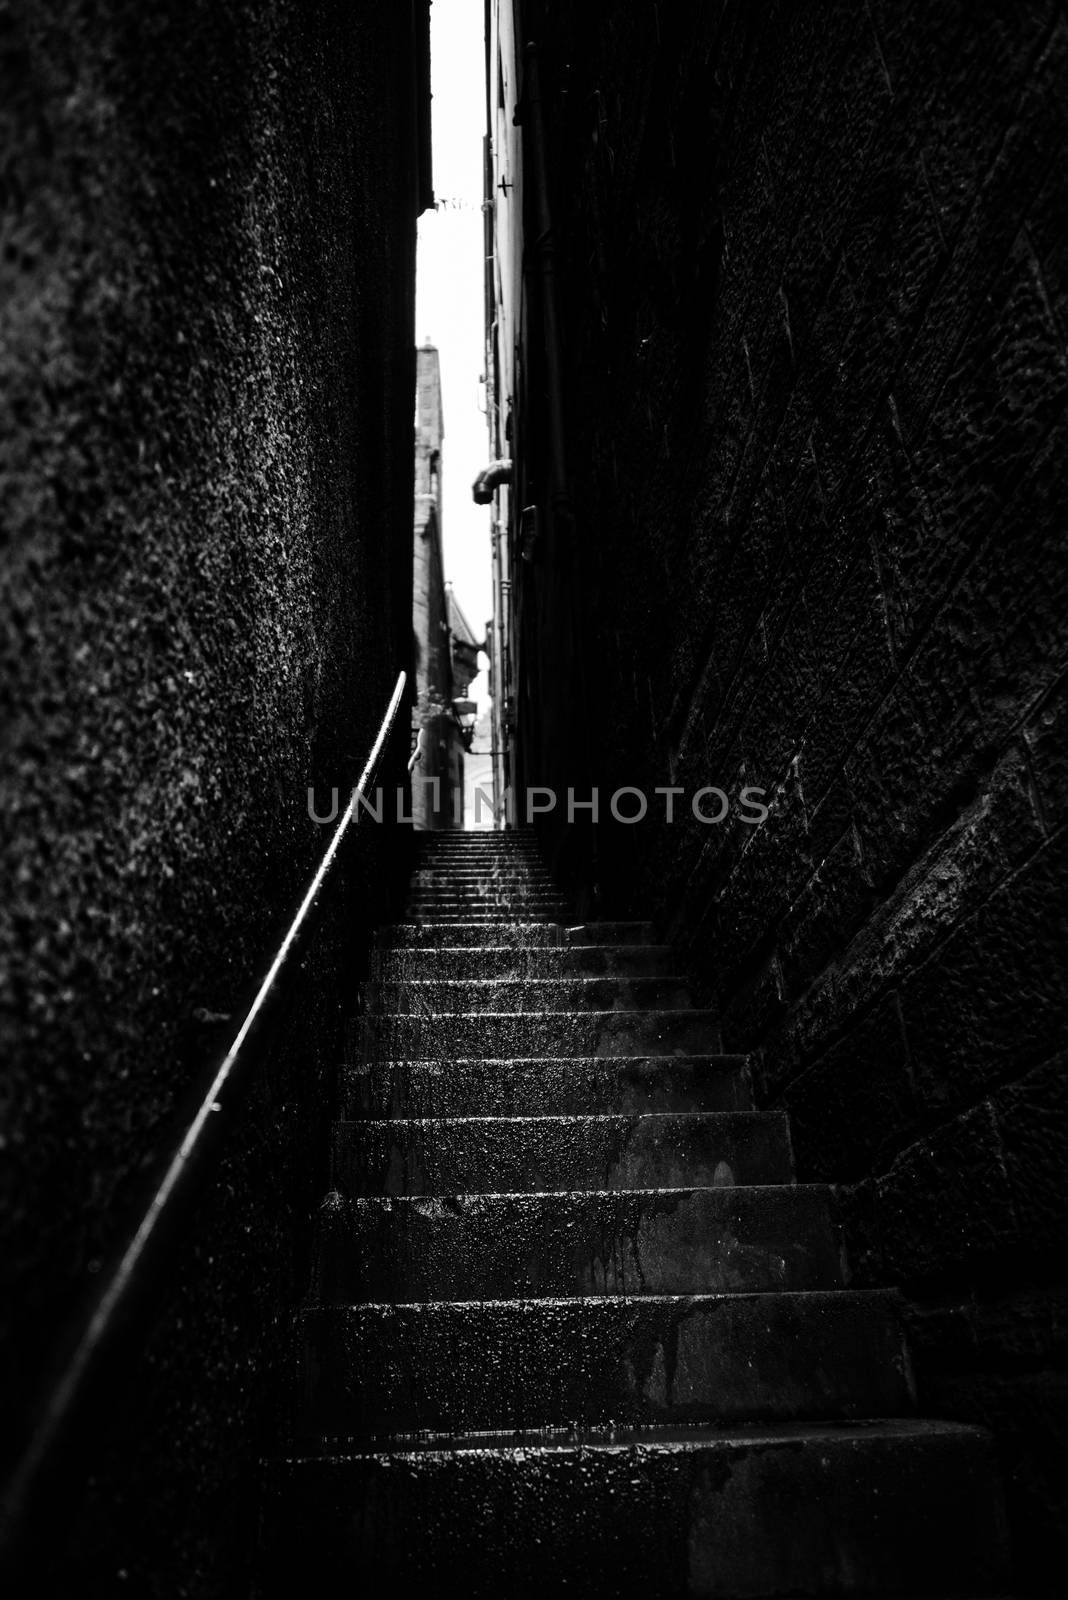 Narrow stairs between two high walls by a rainy day, black and white